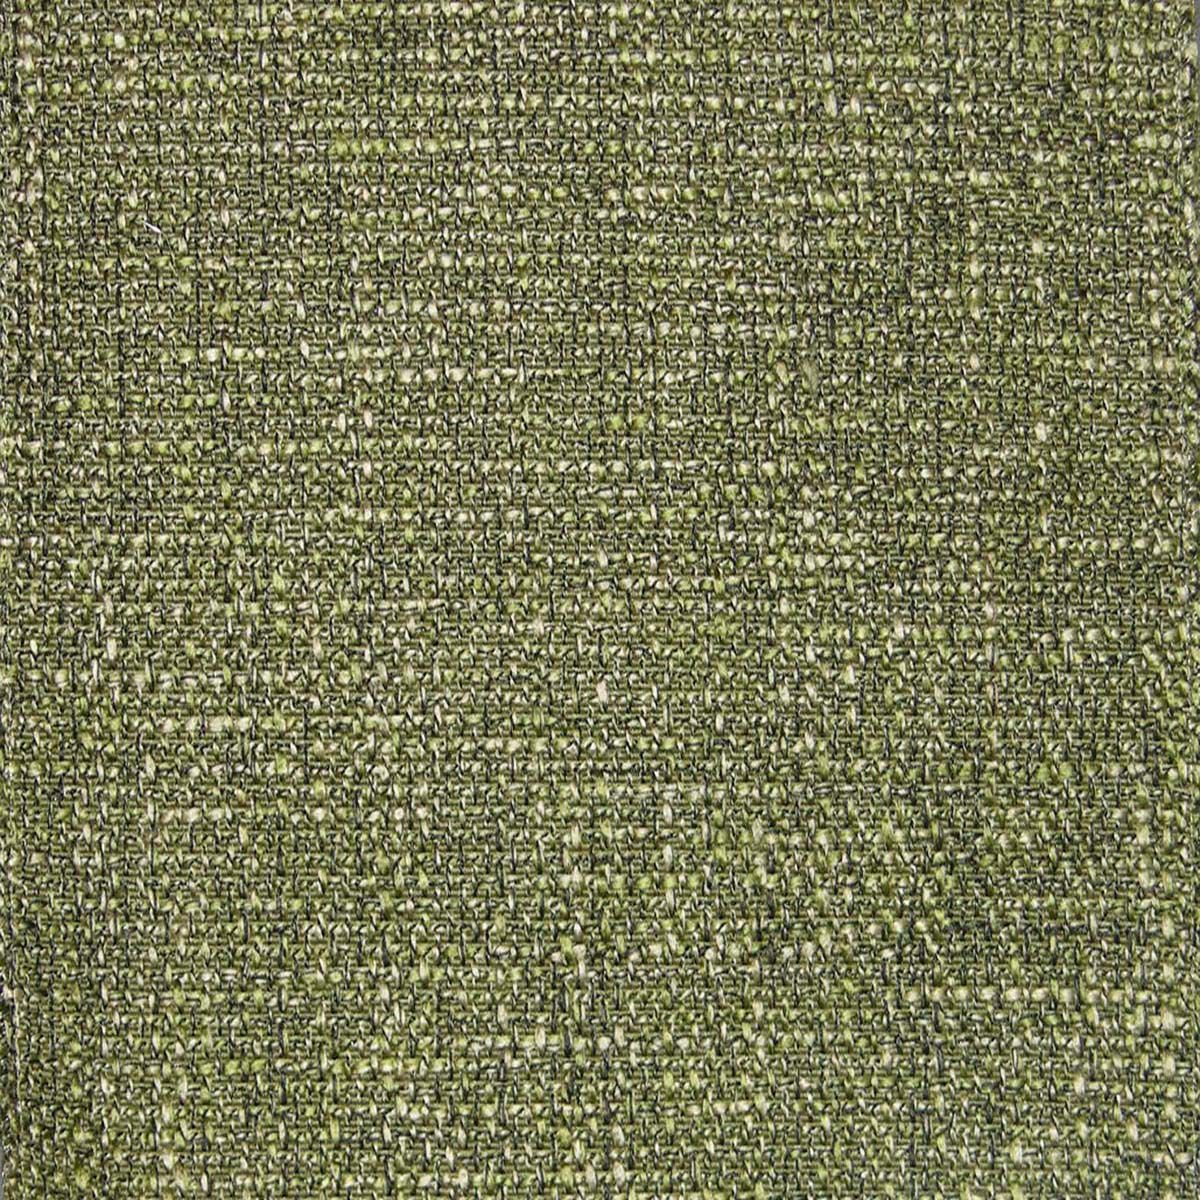 Colbert fabric in moss green color - pattern number HR 15493100 - by Scalamandre in the Old World Weavers collection